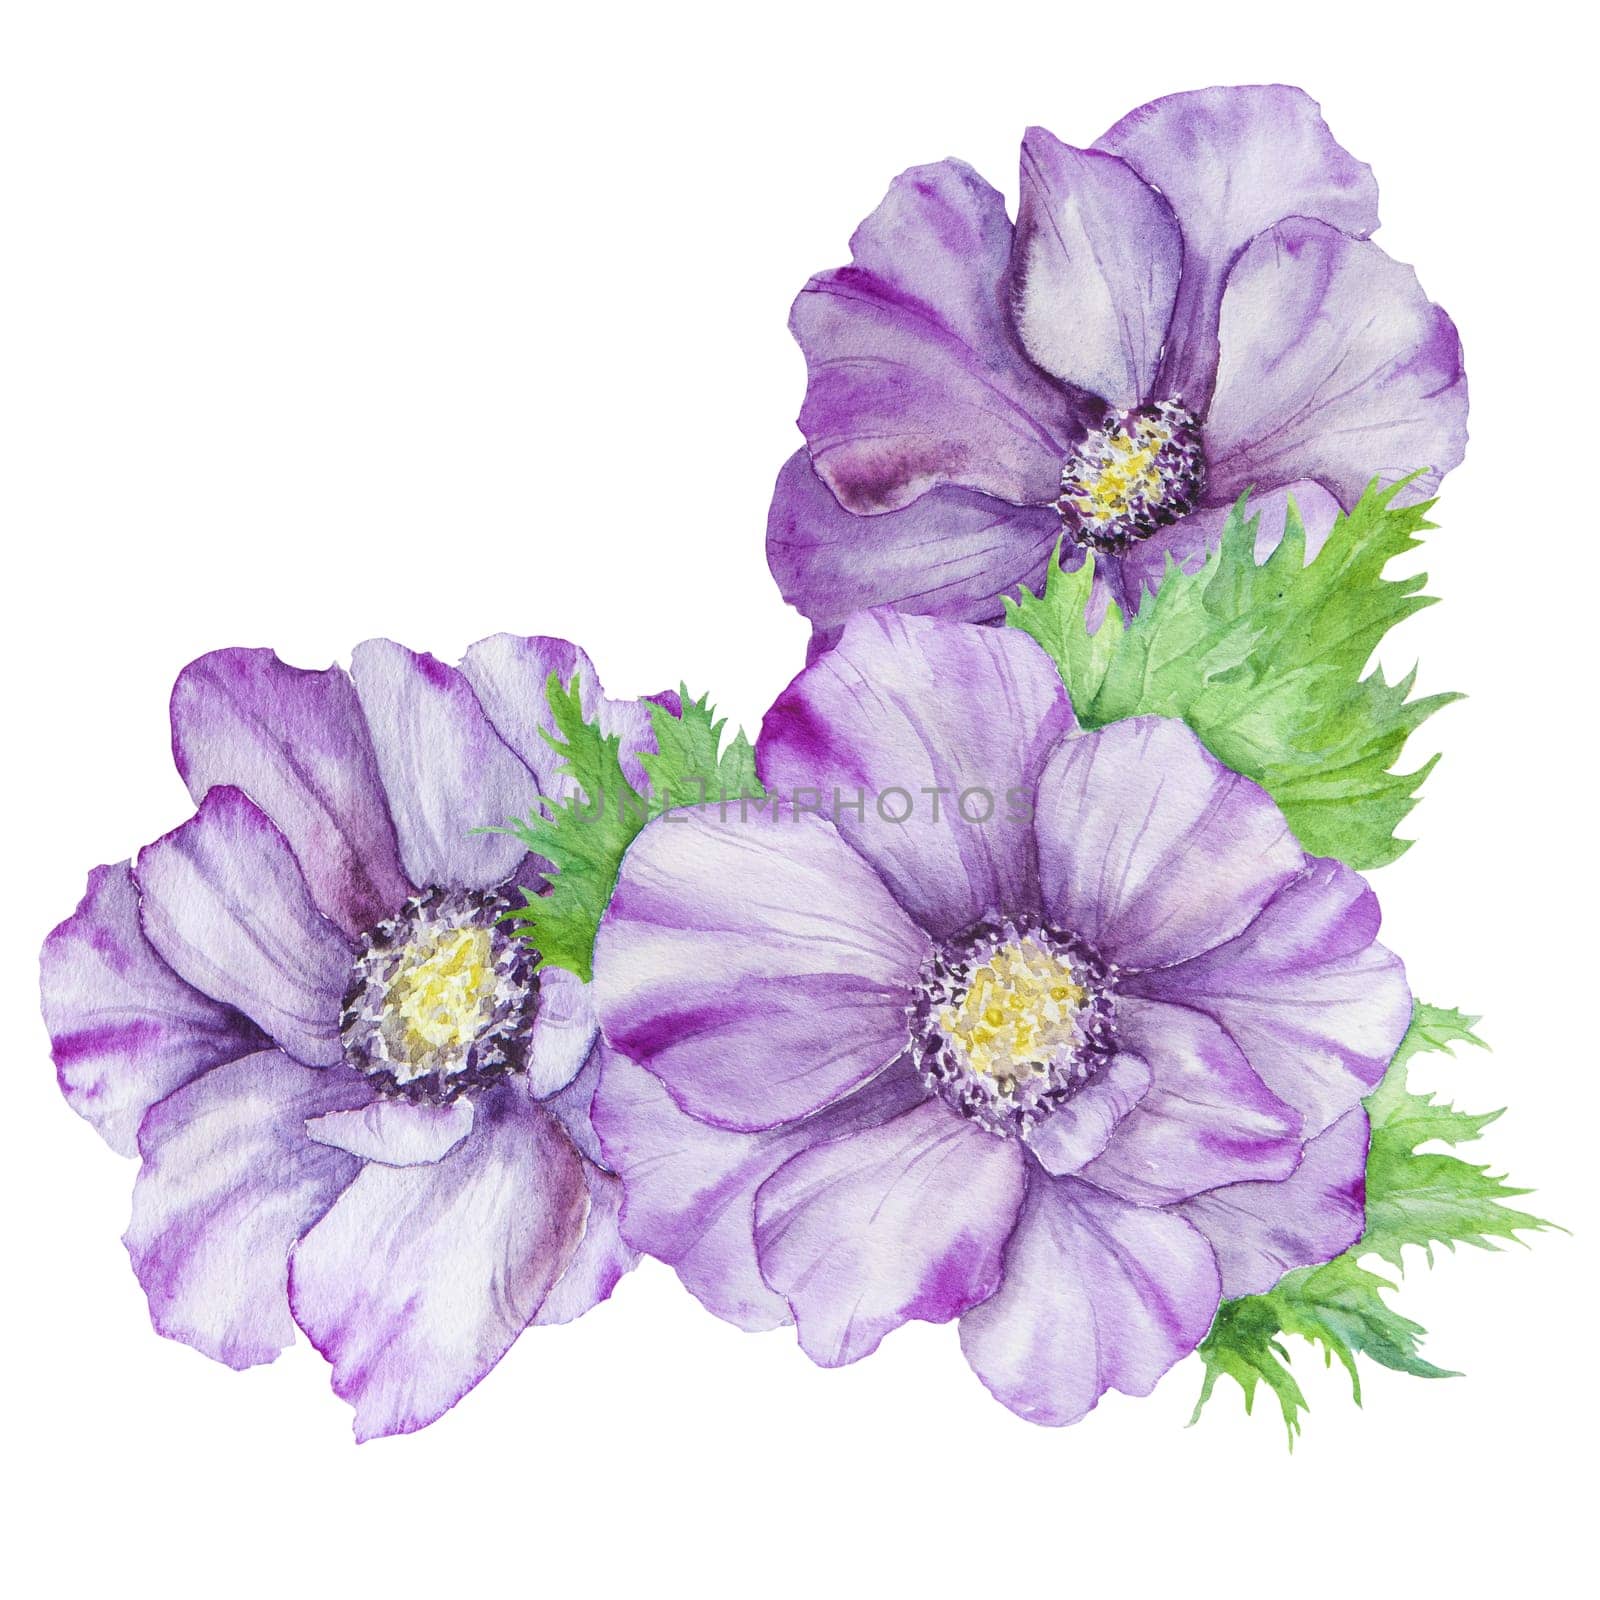 Hand drawn watercolor set of purple anemones with green leaves. Spring compositioin for wedding invitations, greeting cards by florainlove_art